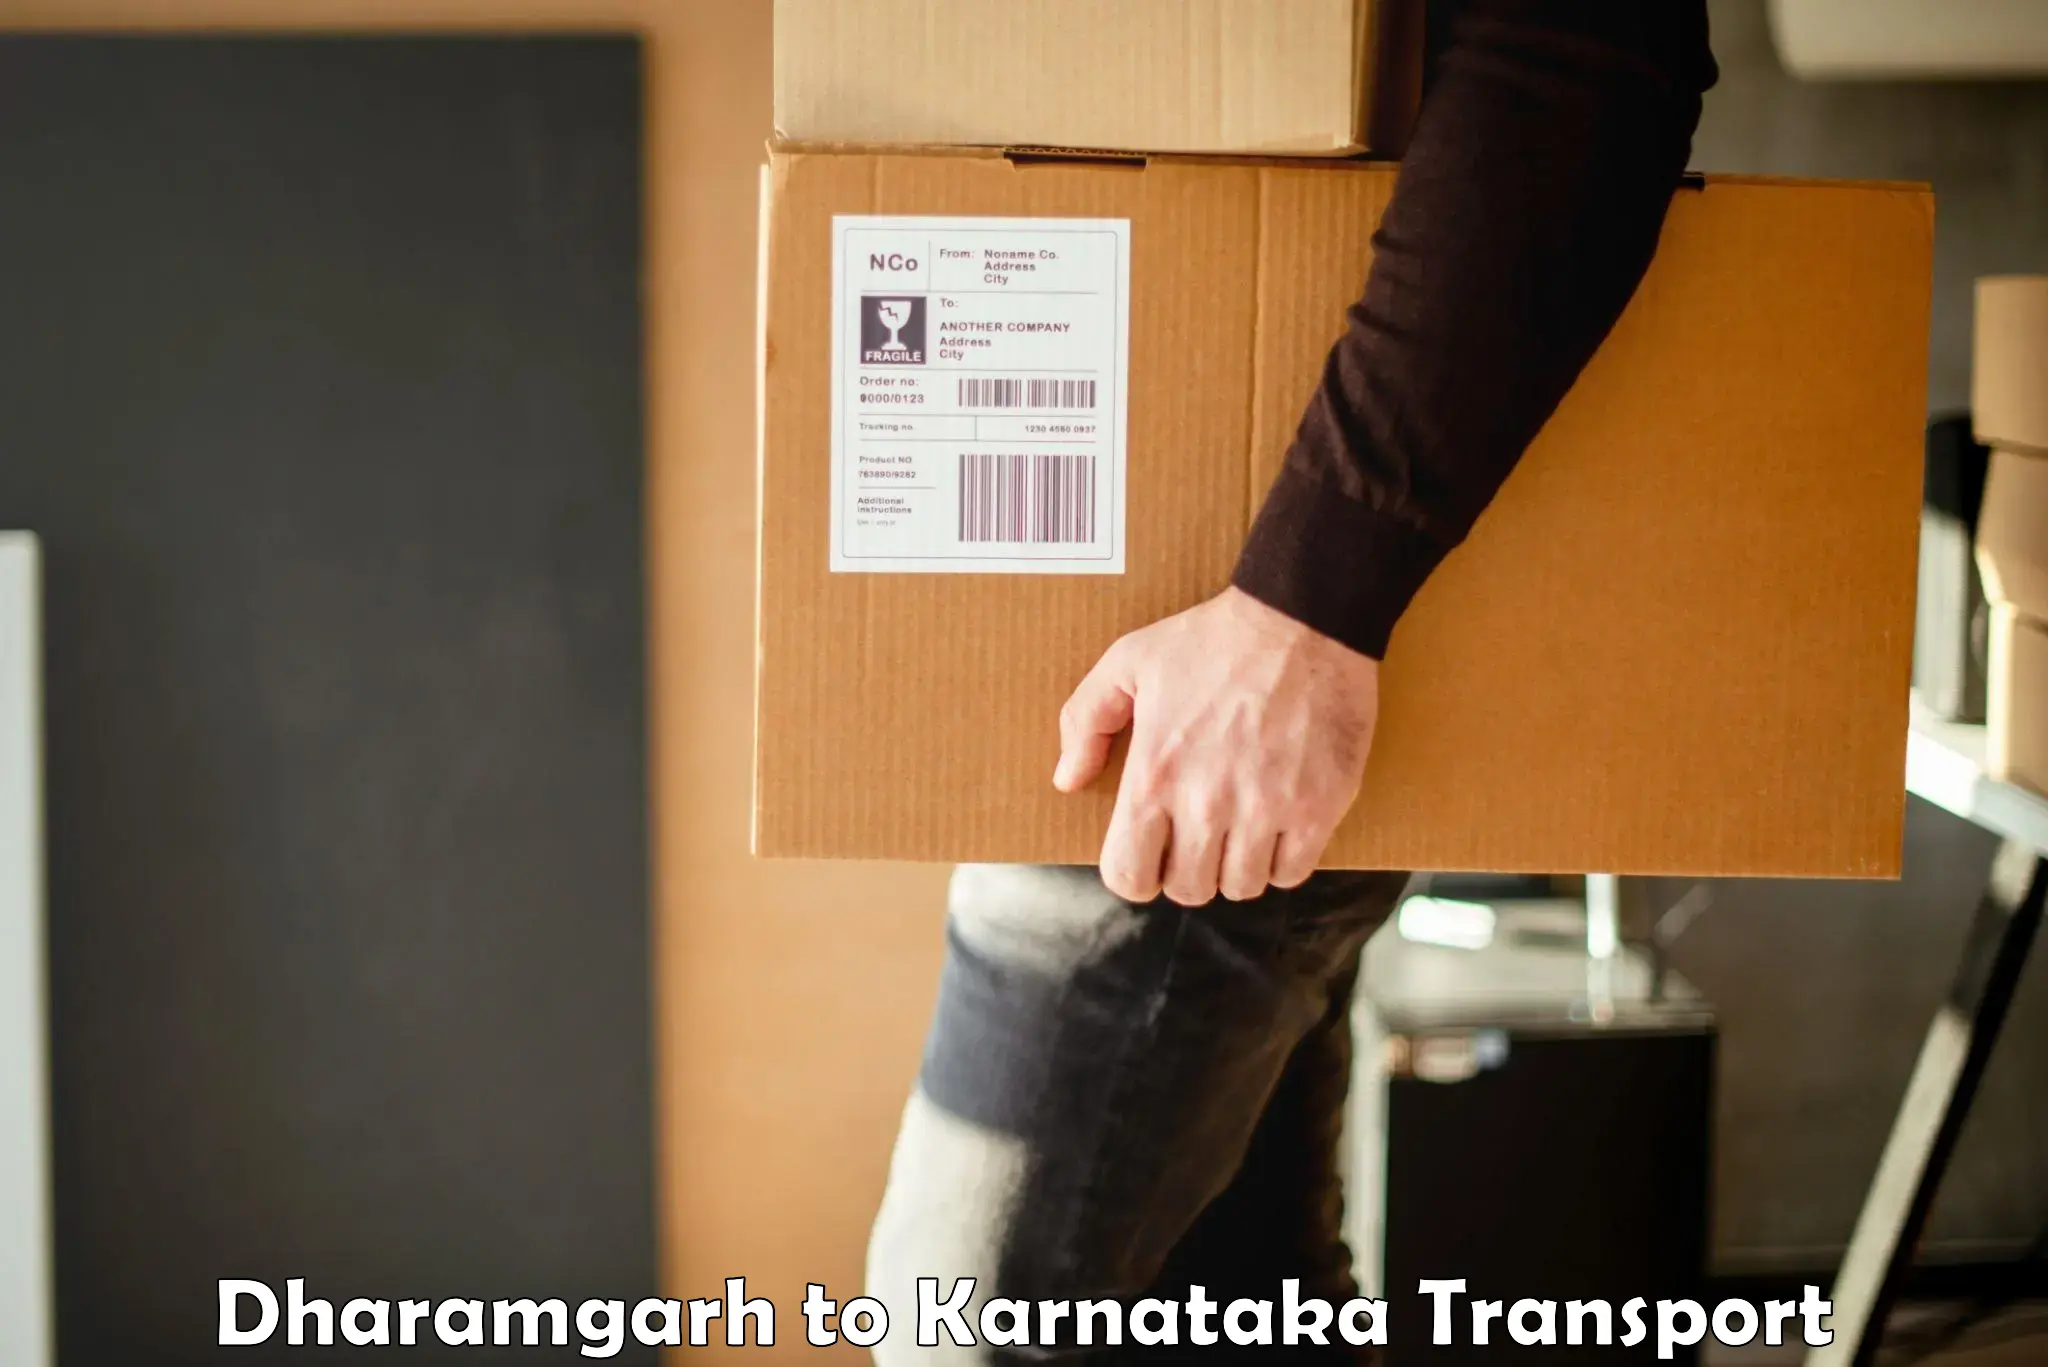 Container transport service Dharamgarh to Mangalore Port